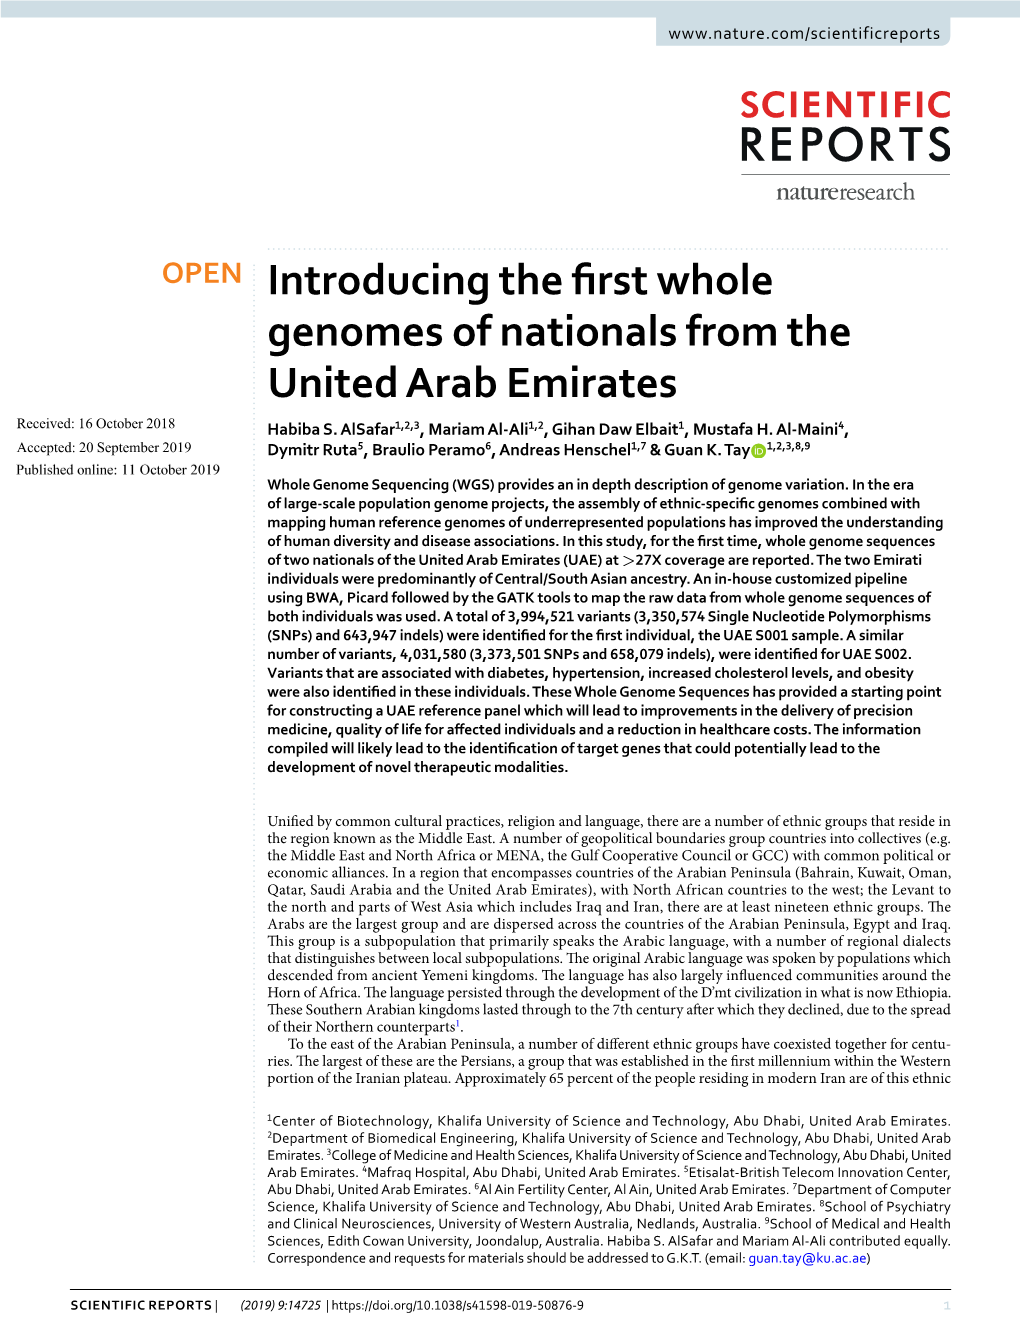 Introducing the First Whole Genomes of Nationals from the United Arab